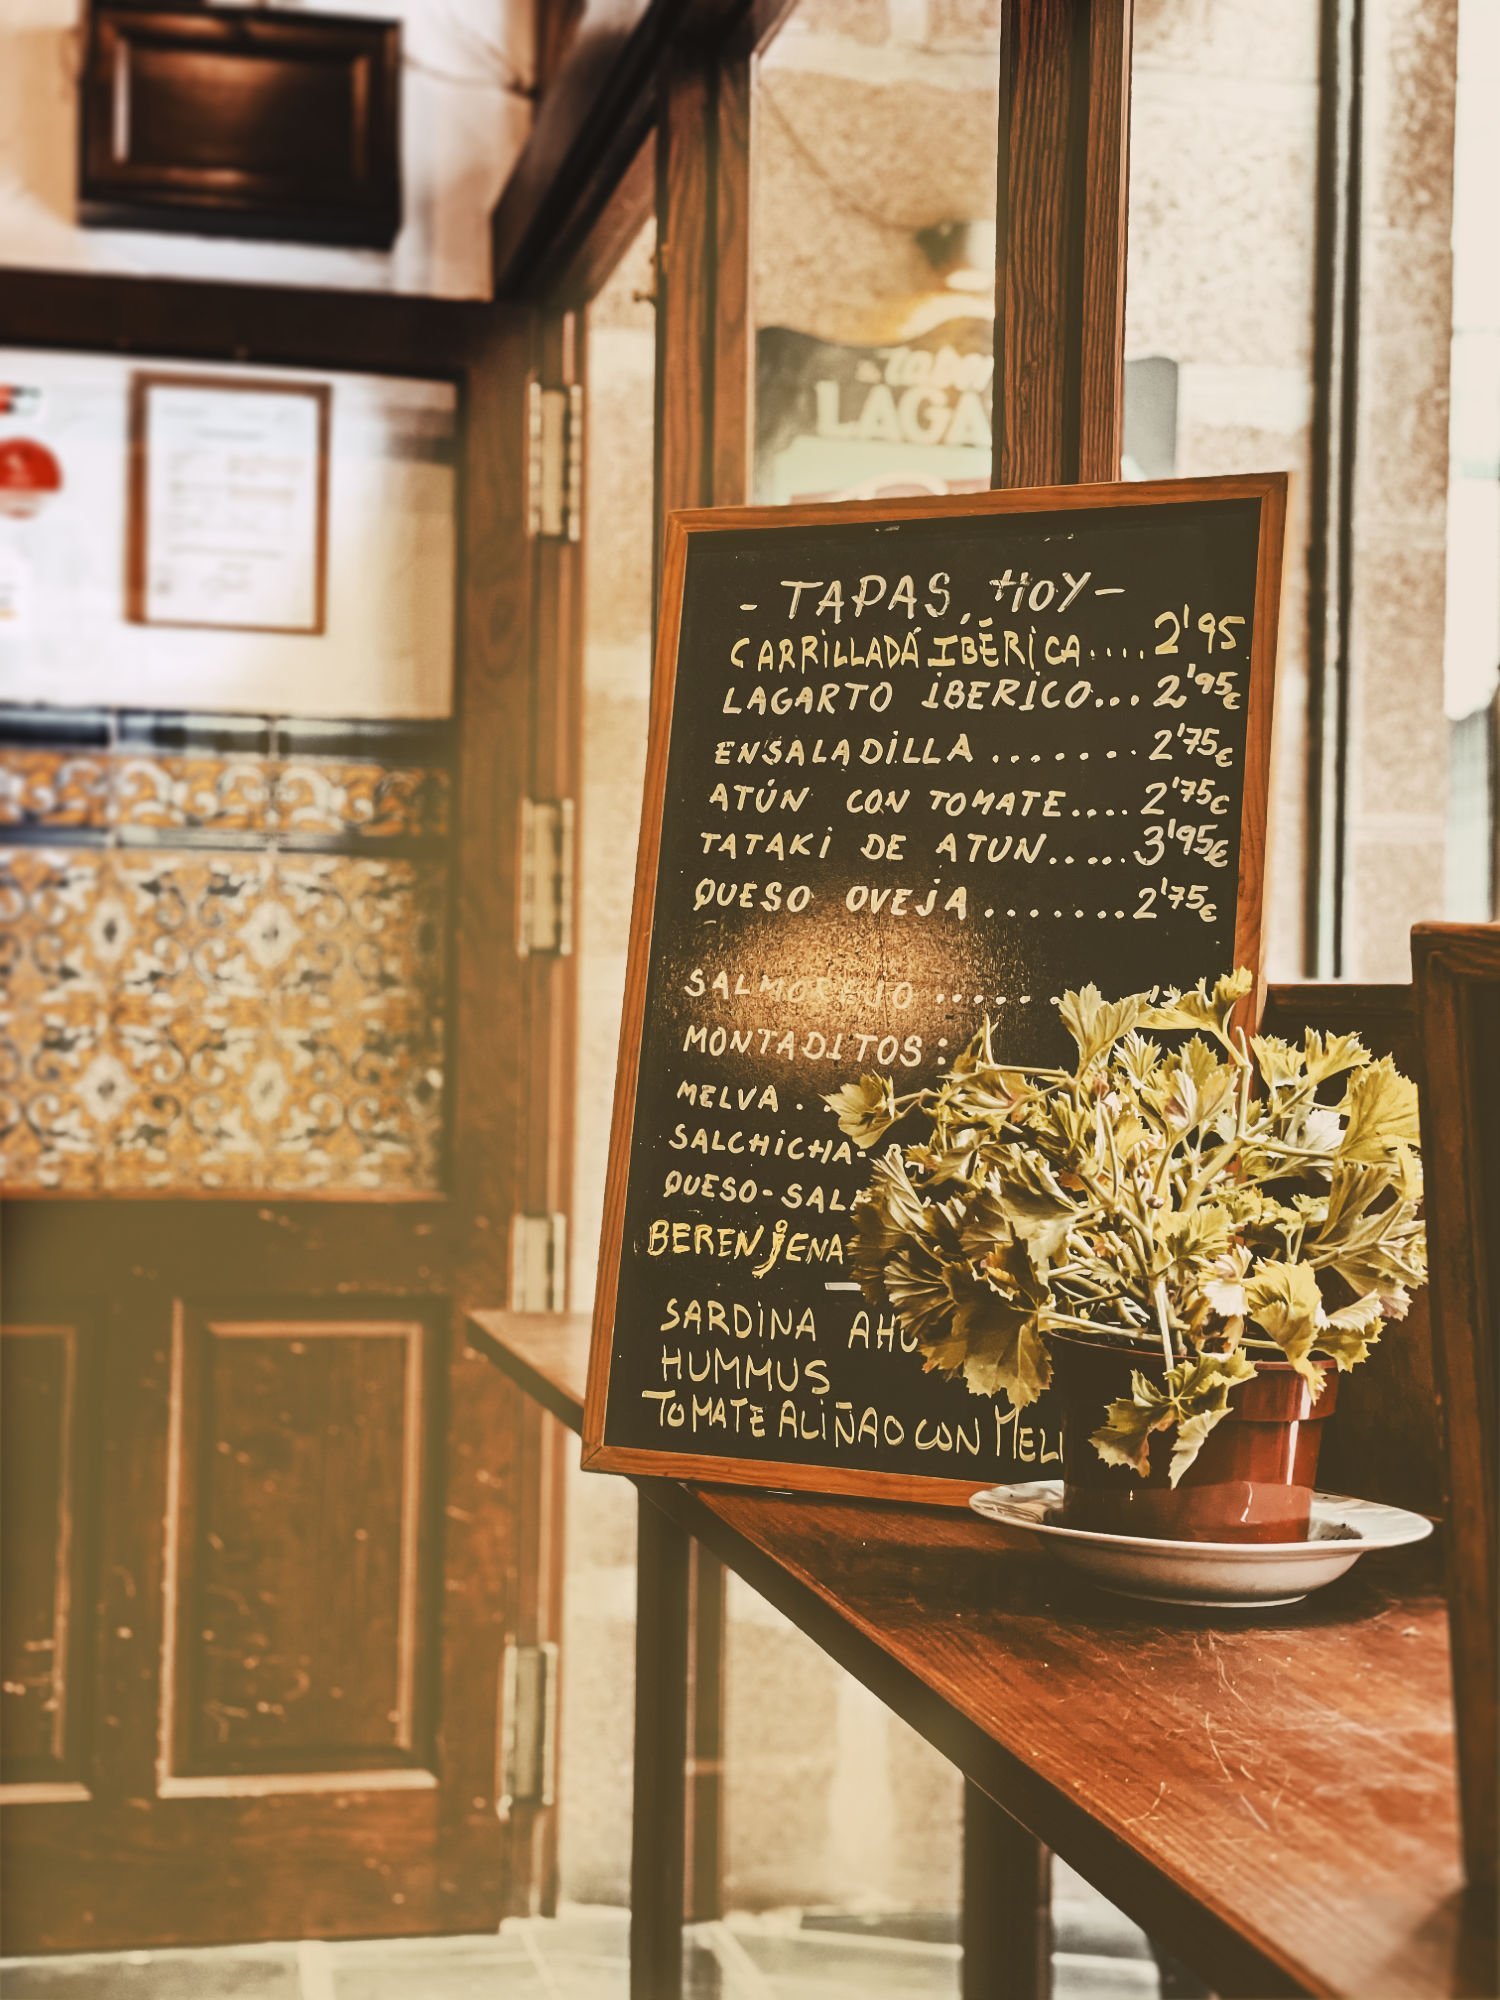 An interior of a tapas bar sits bathed in golden light from outside. A chalkboard sits displaying the tapas specials of the day.